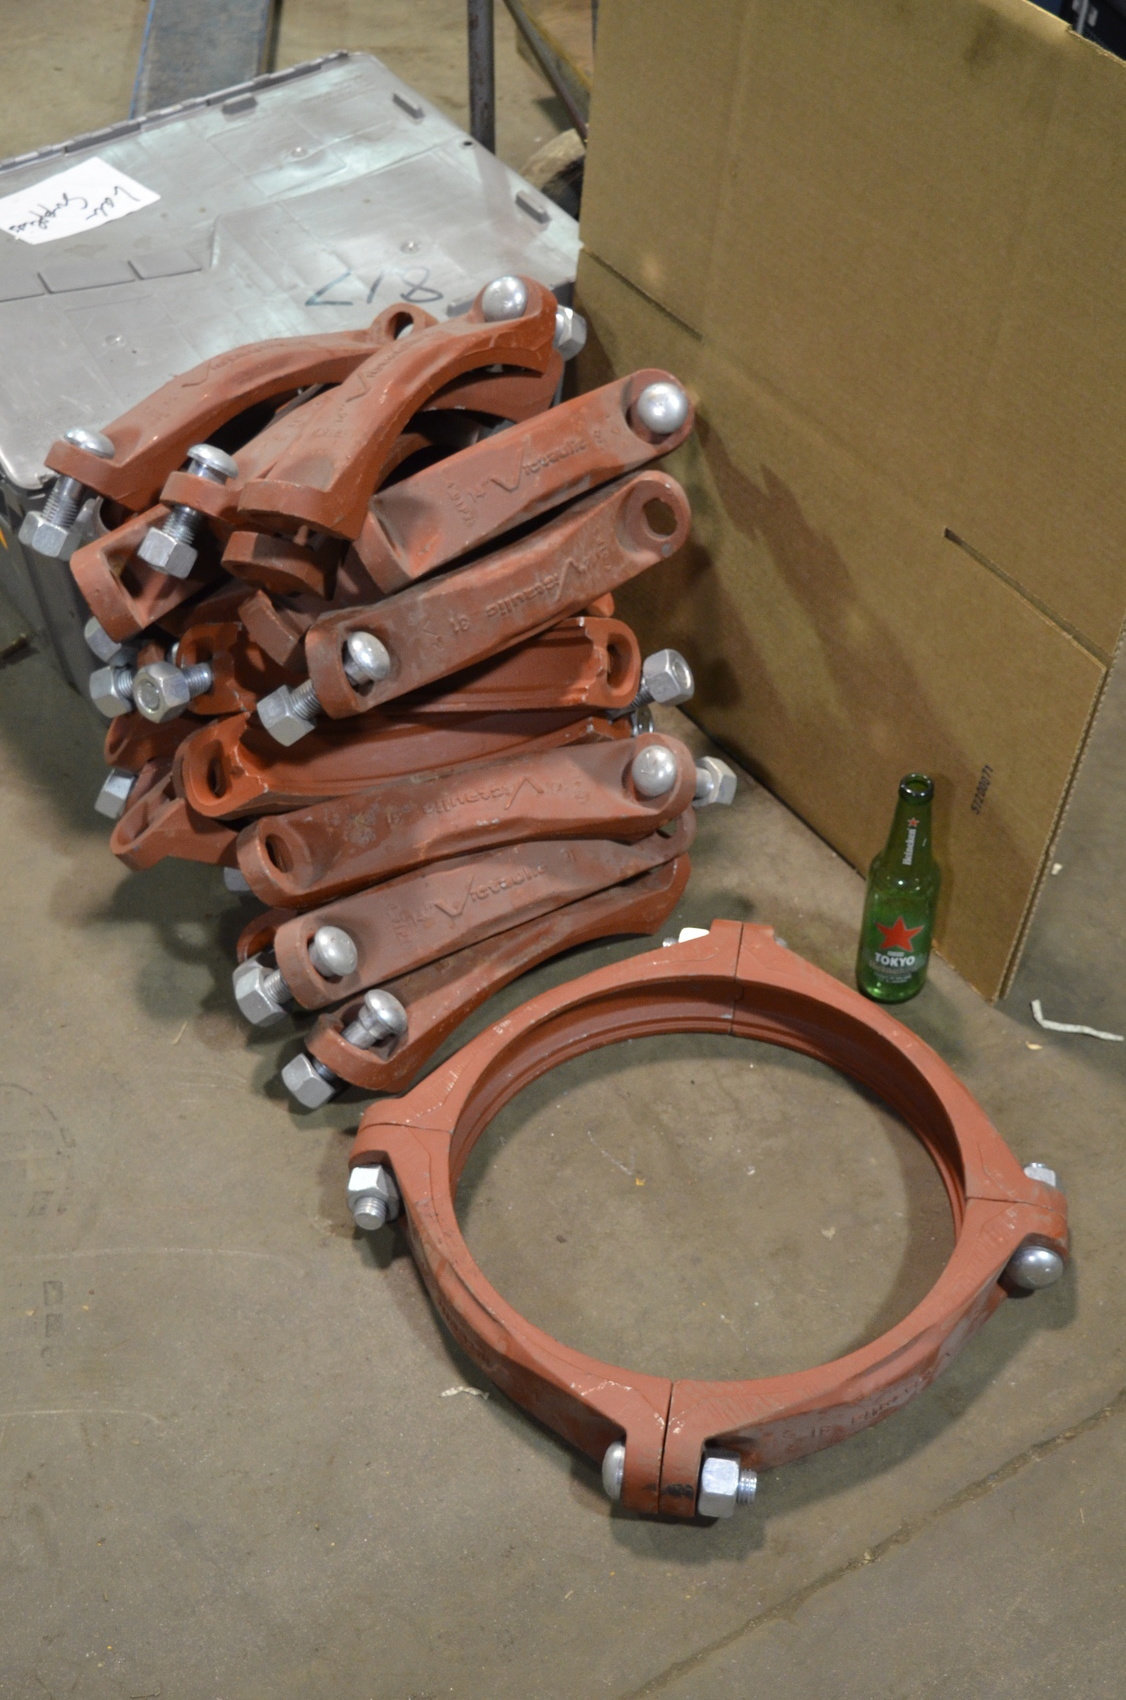 NEW Lot of 8 Victaulic 14"Pipe couplings